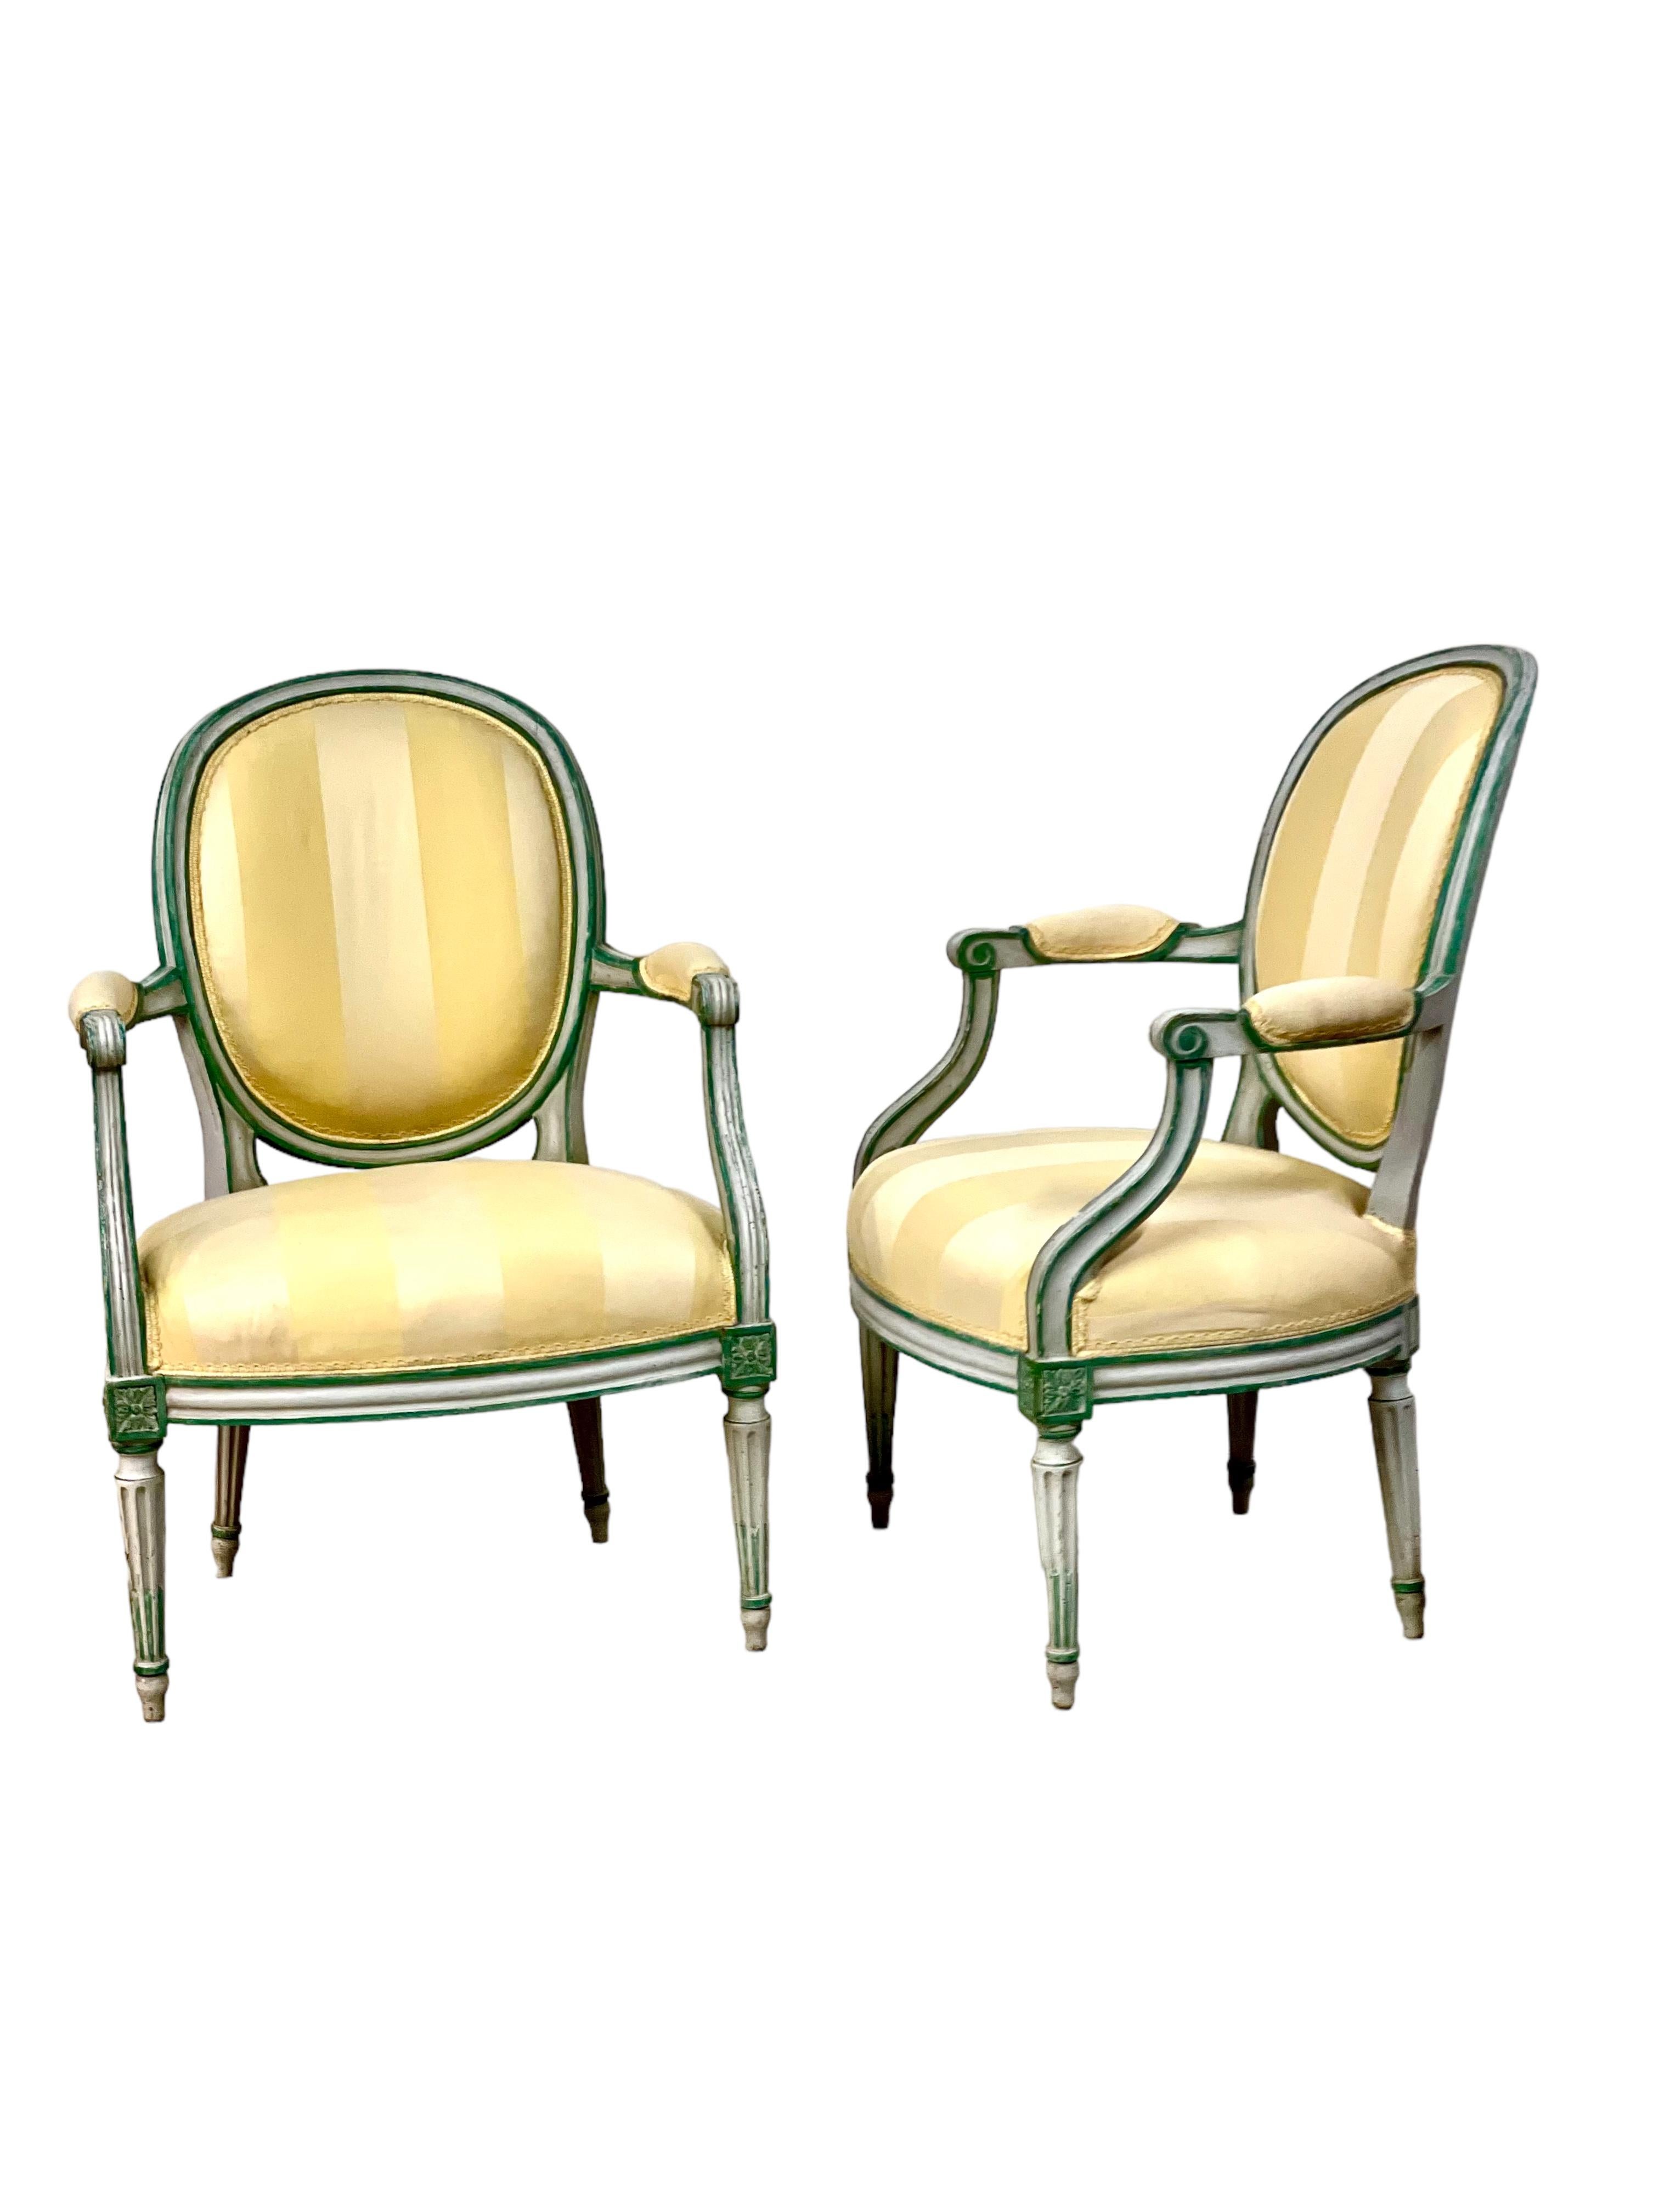 A charming pair of Louis XVI era 'Fauteuils en Cabriole', upholstered in stripes of luxurious cream and gold satin silk, edged in gold-braid trim. Discovered in a Provençal mansion, these open armchairs feature medallion-shaped concave backs, which,